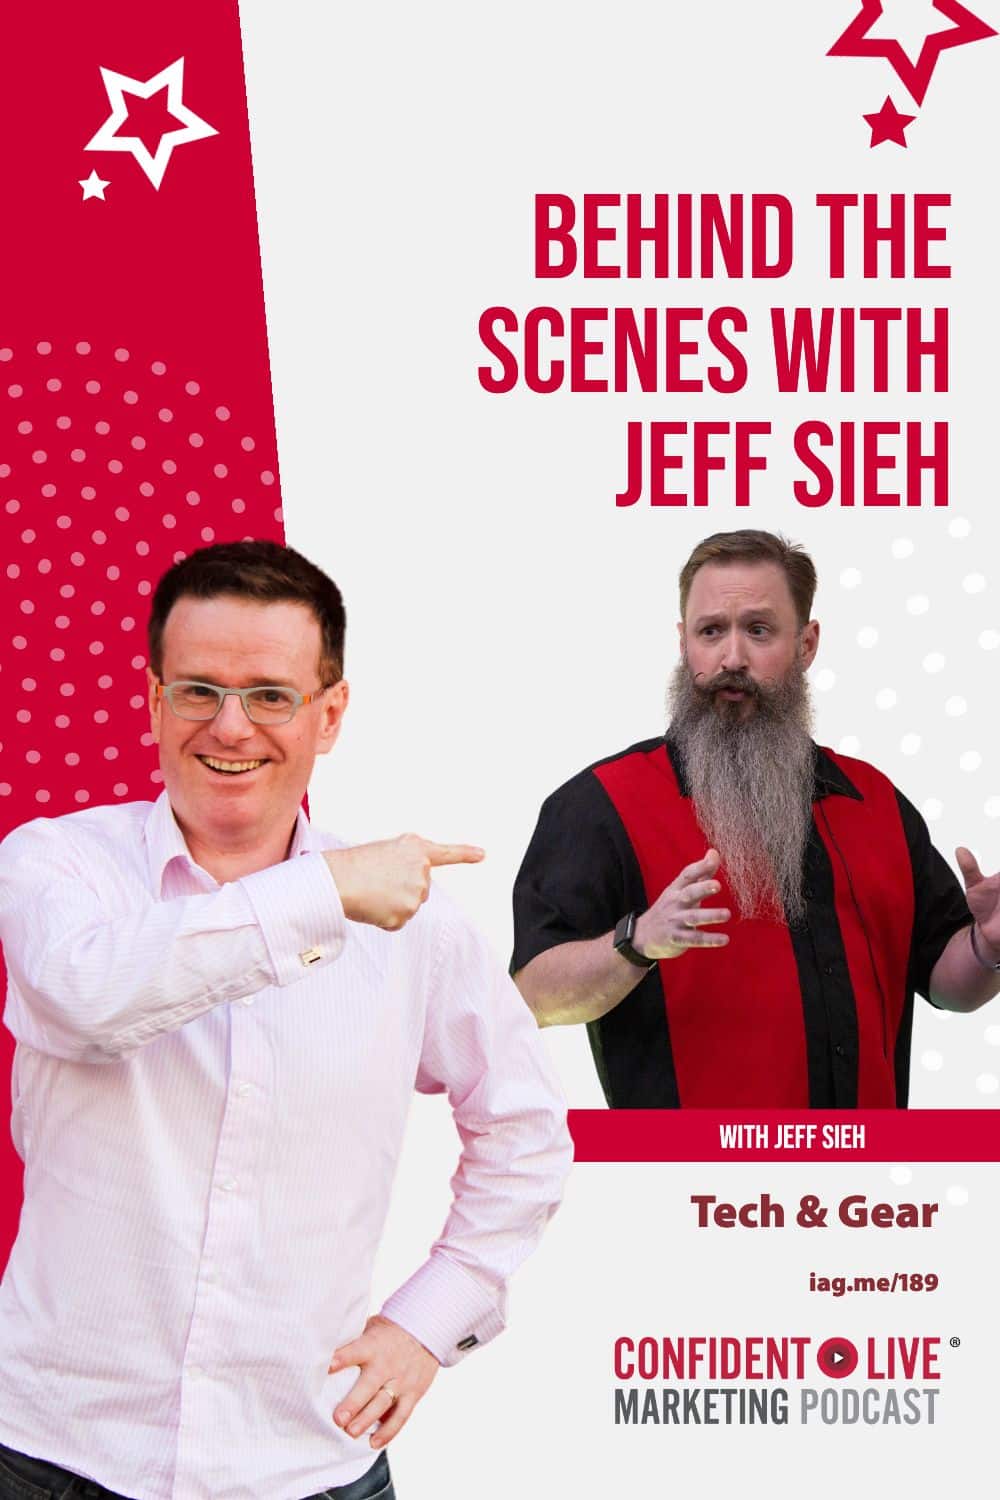 Behind the Scenes with Jeff Sieh